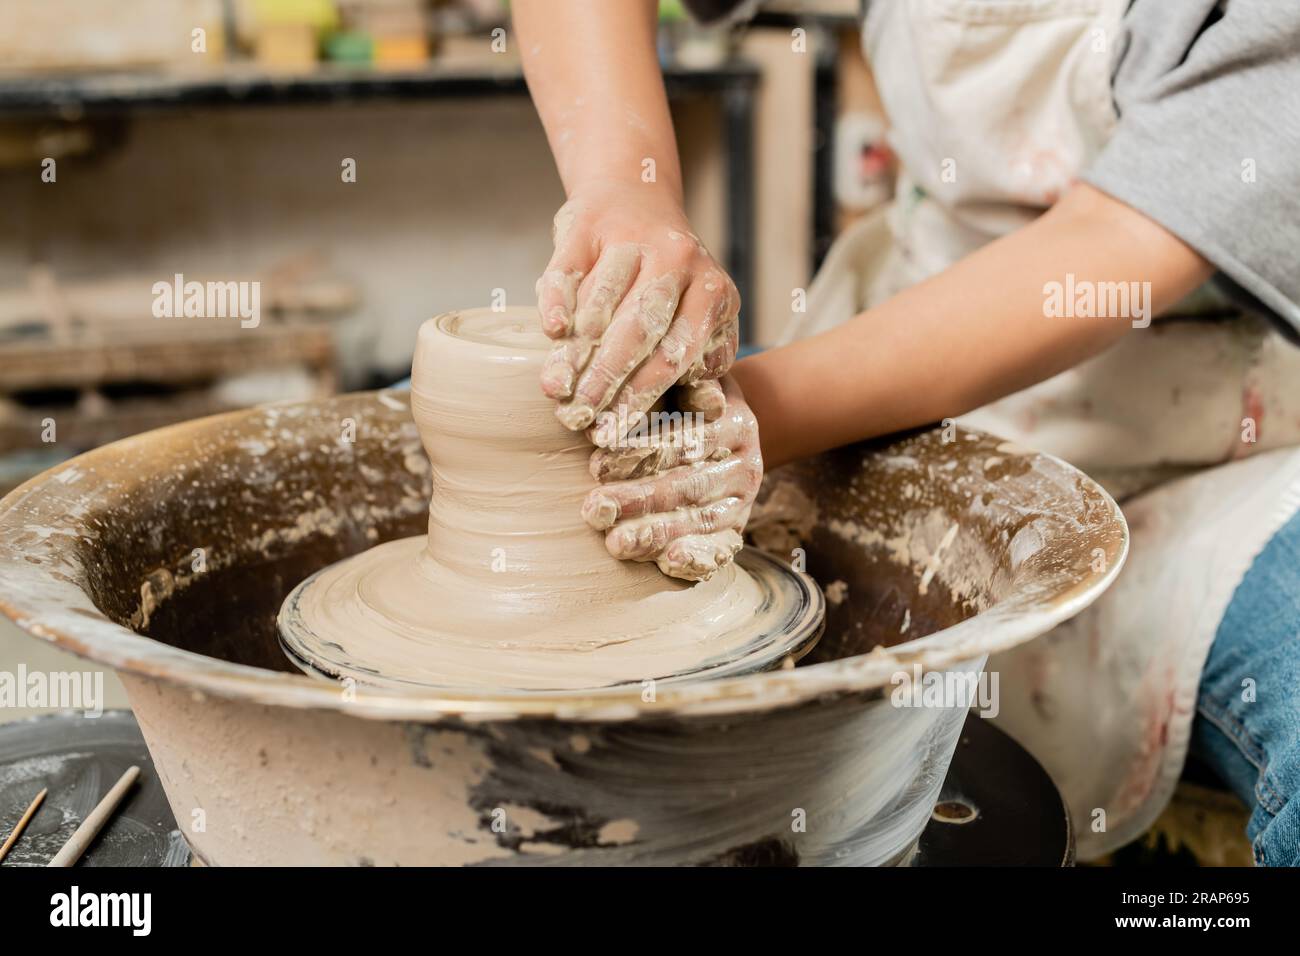 Cropped view of blurred female ceramicist in apron molding wet clay and working on spinning pottery wheel in art ceramic studio, skilled pottery makin Stock Photo